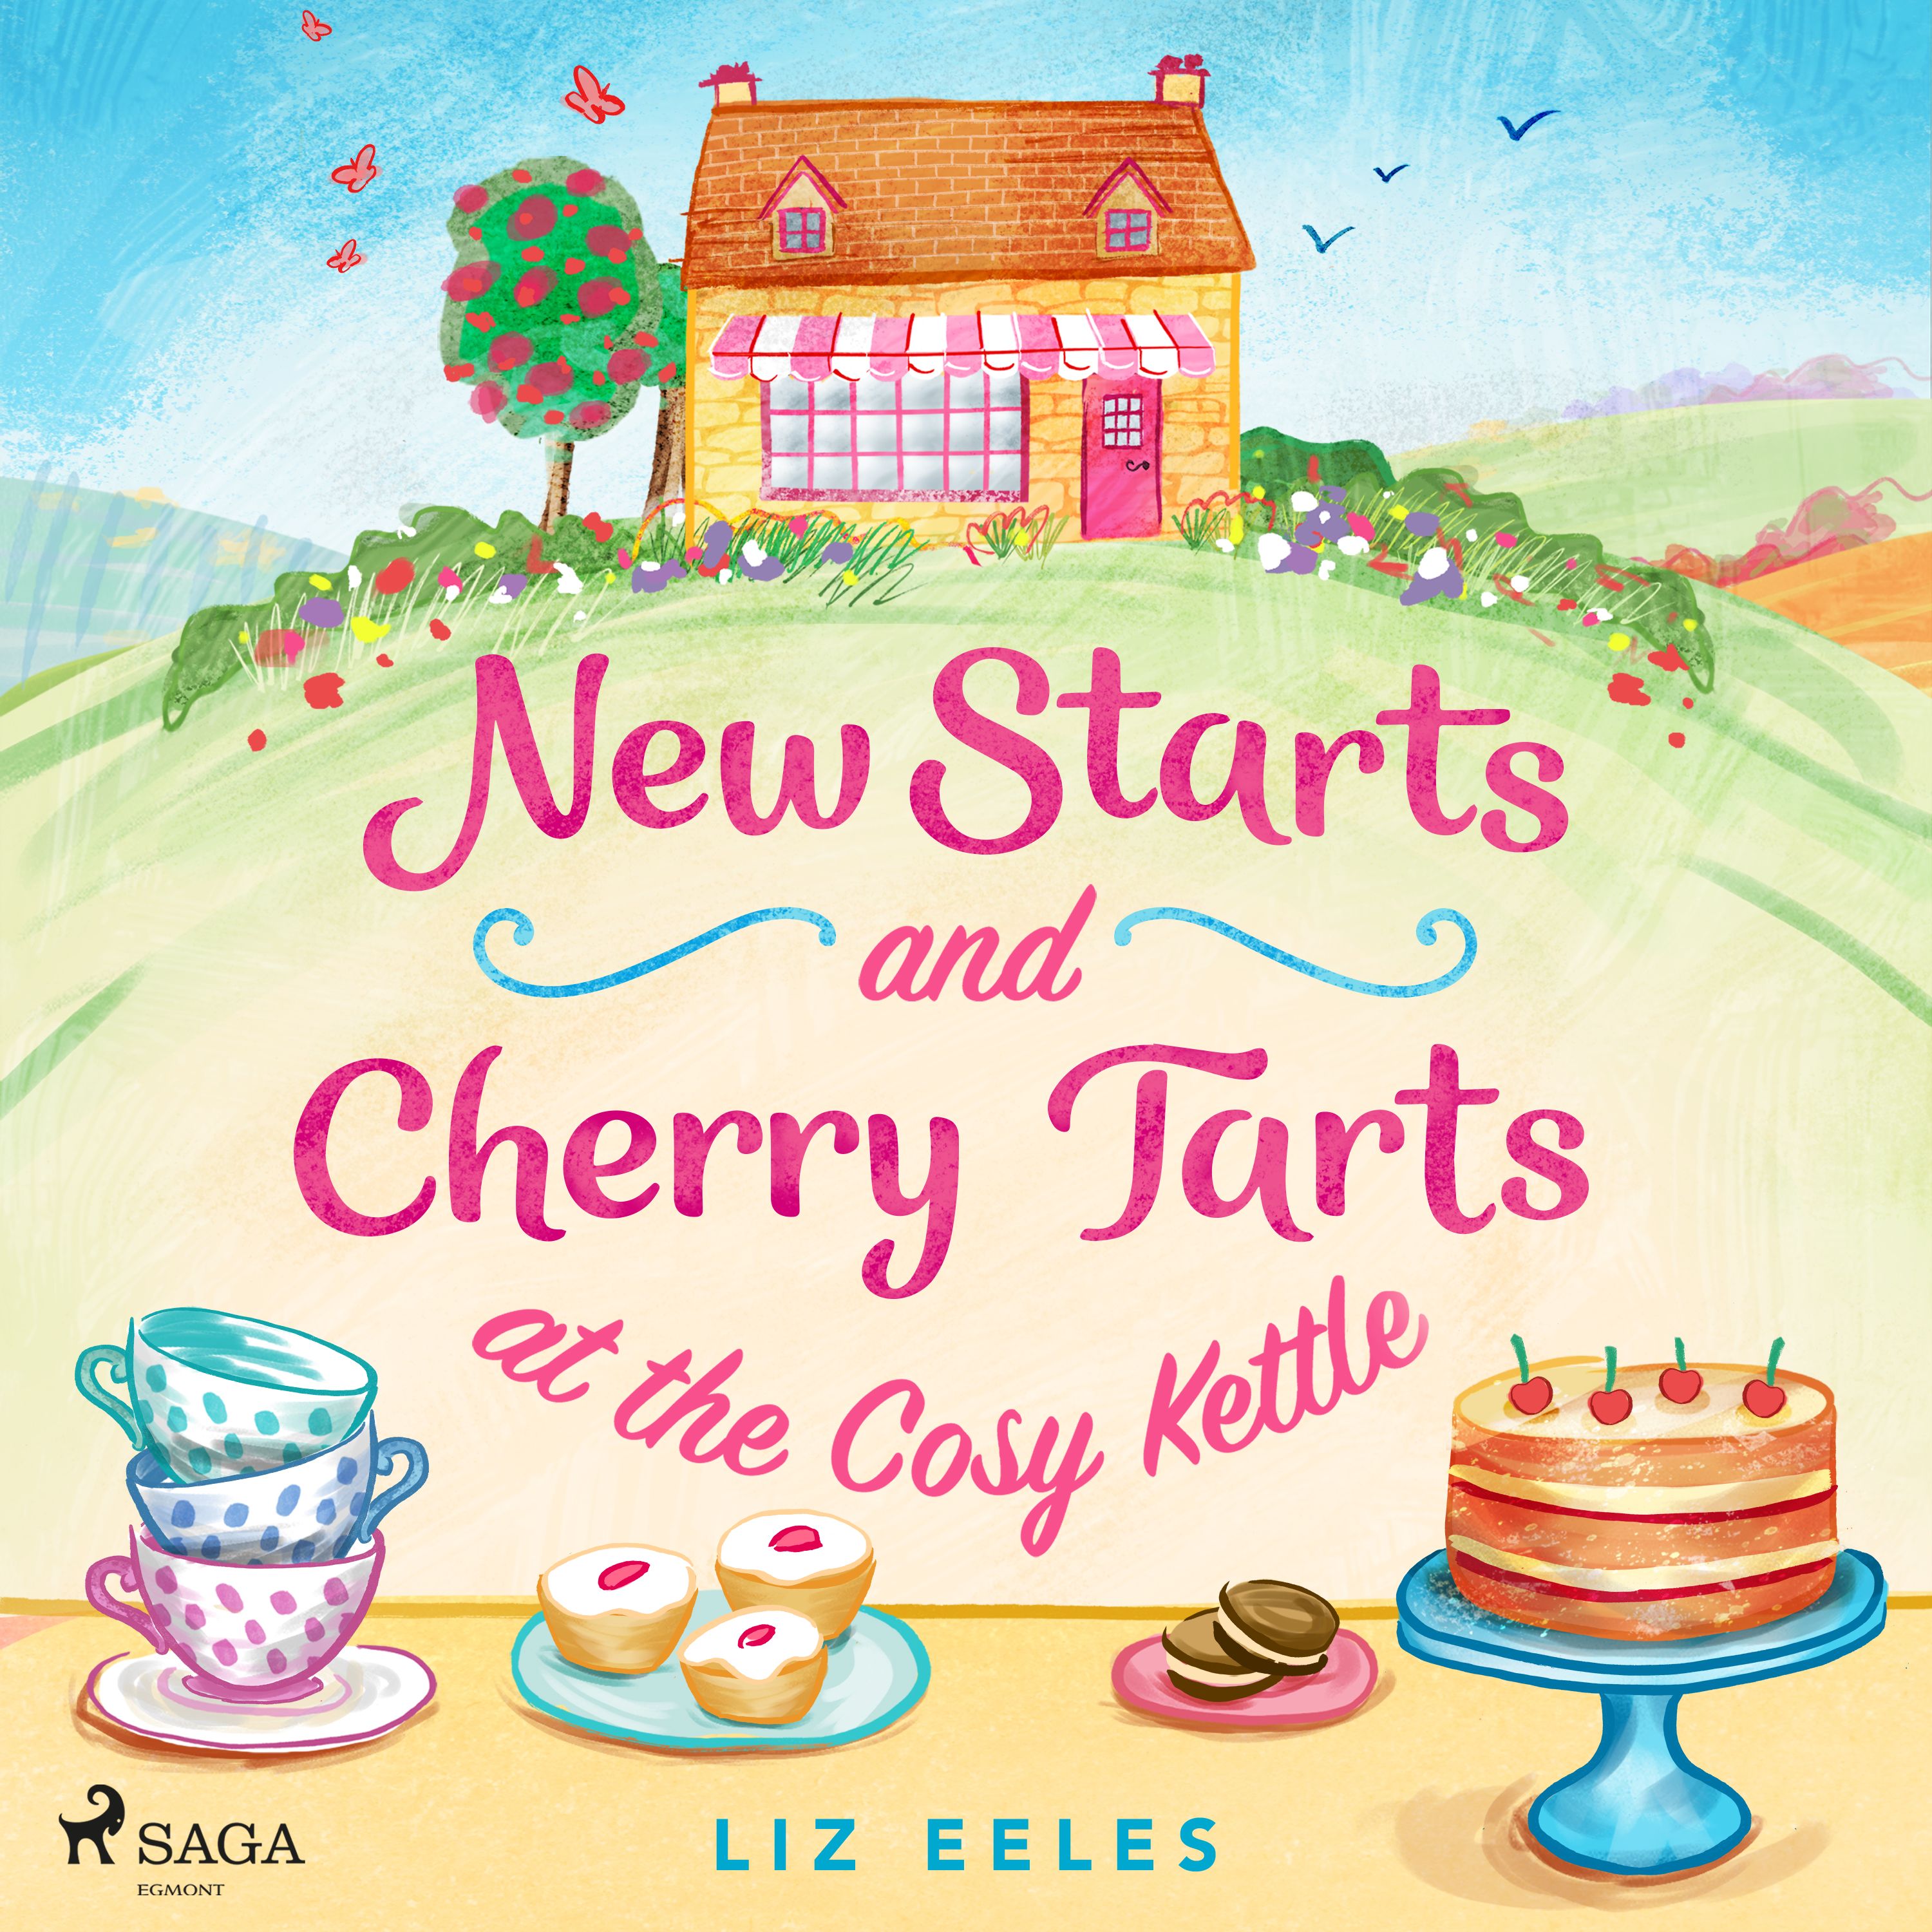 New Starts and Cherry Tarts at the Cosy Kettle, lydbog af Liz Eeles